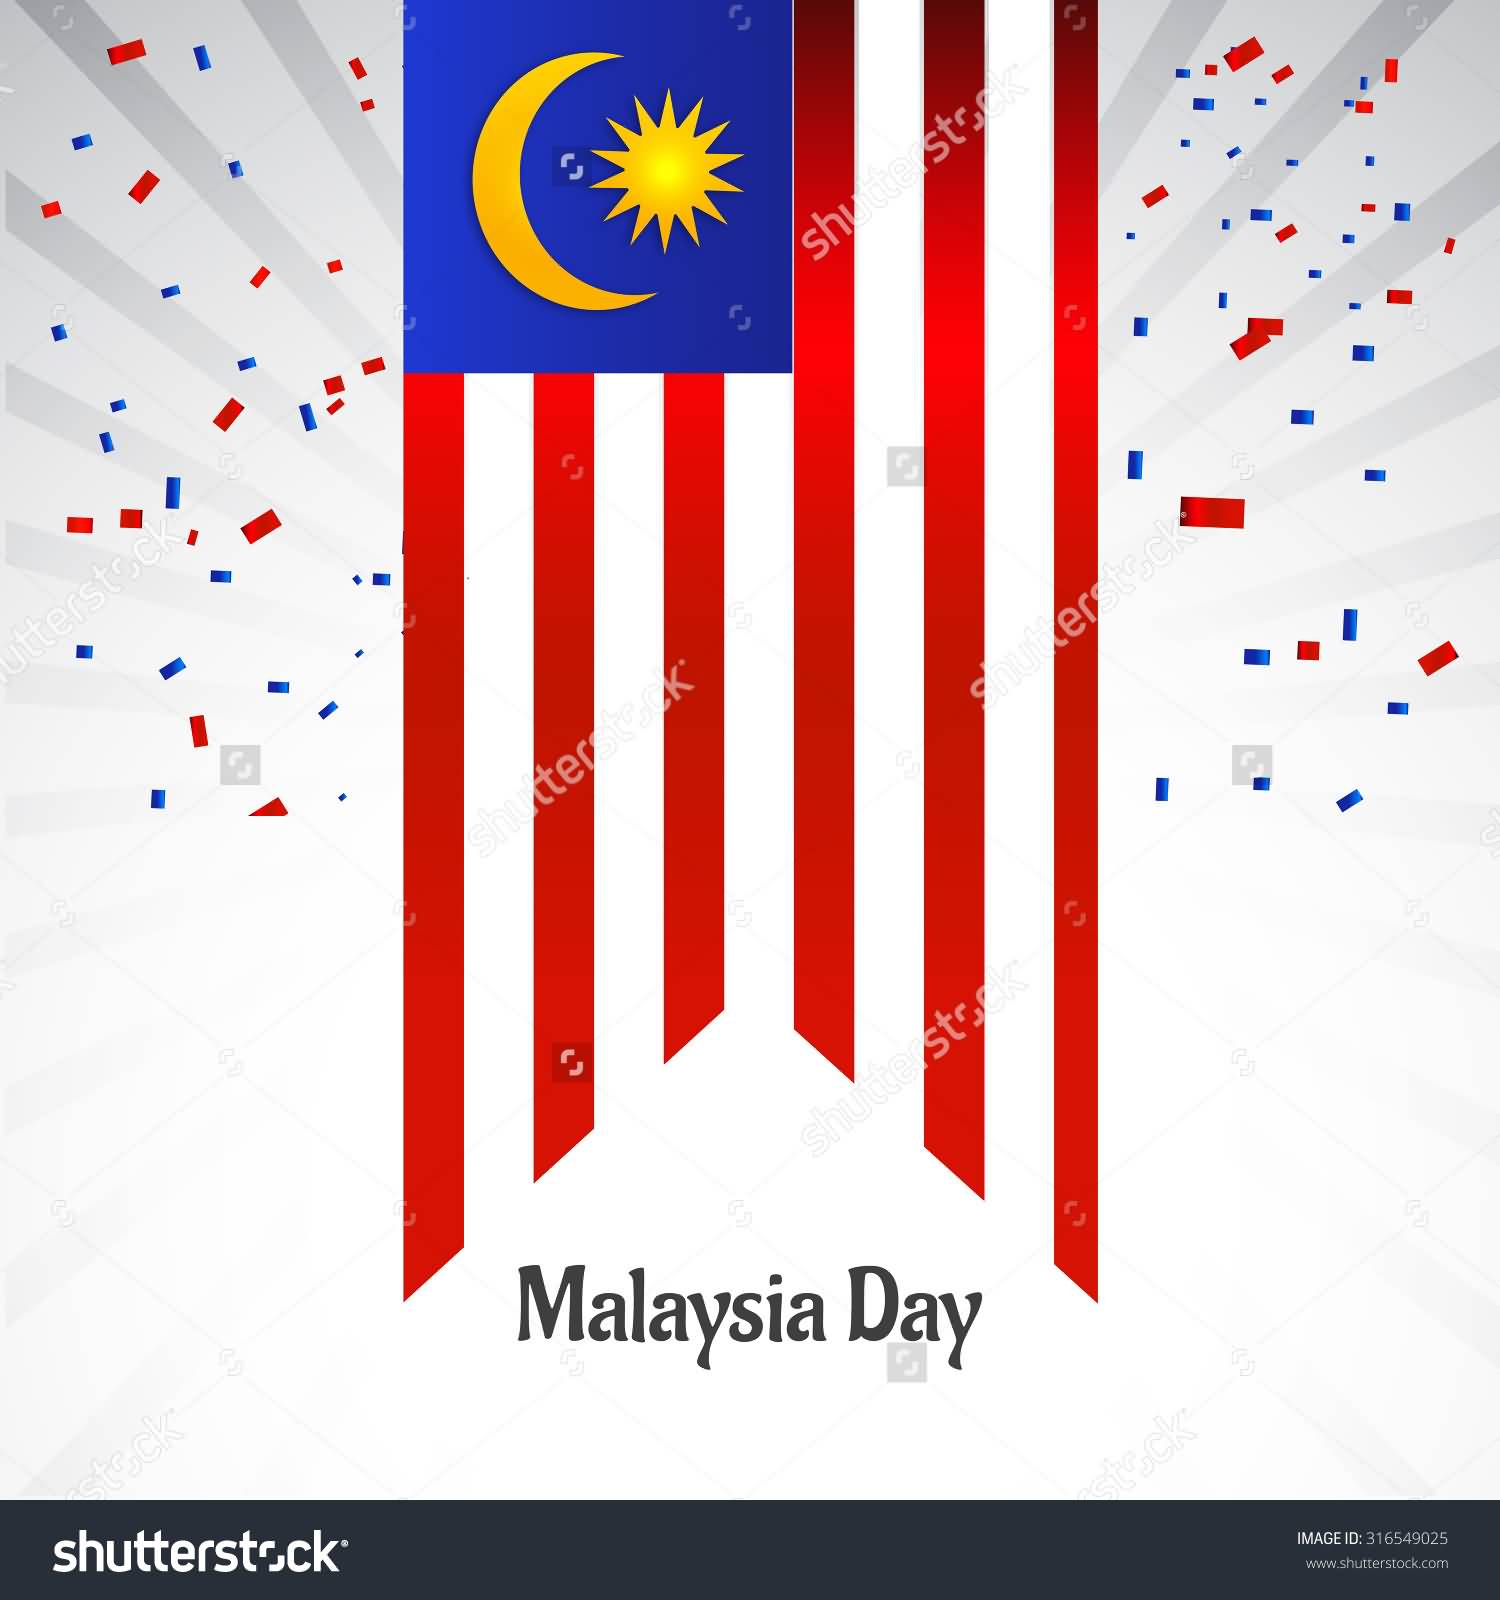 Malaysia Day Flag Illustration Picture